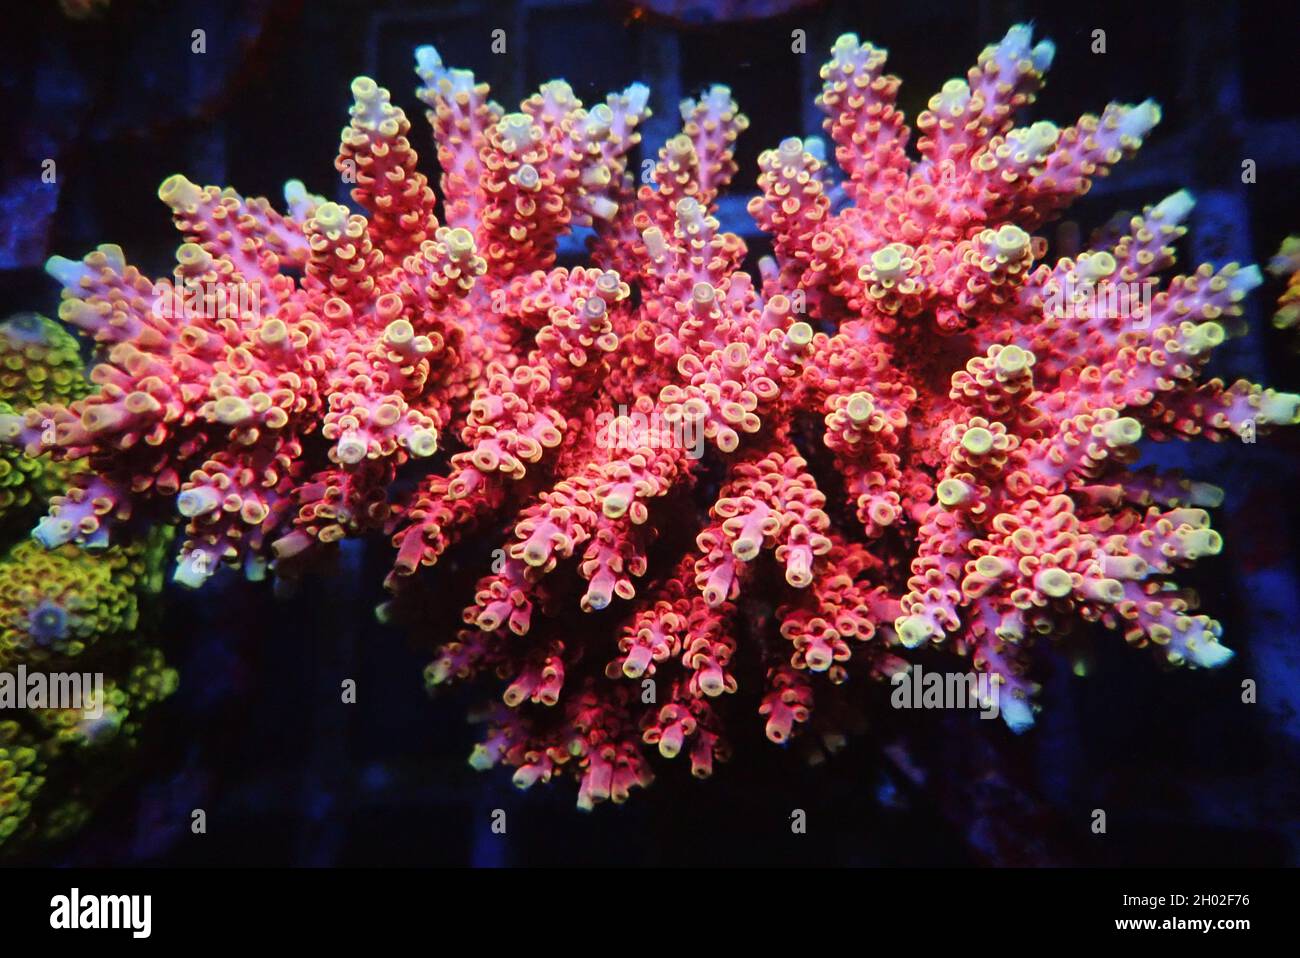 Acropora SPS coral is one of the most popular coral in home reef aquaria hobby Stock Photo